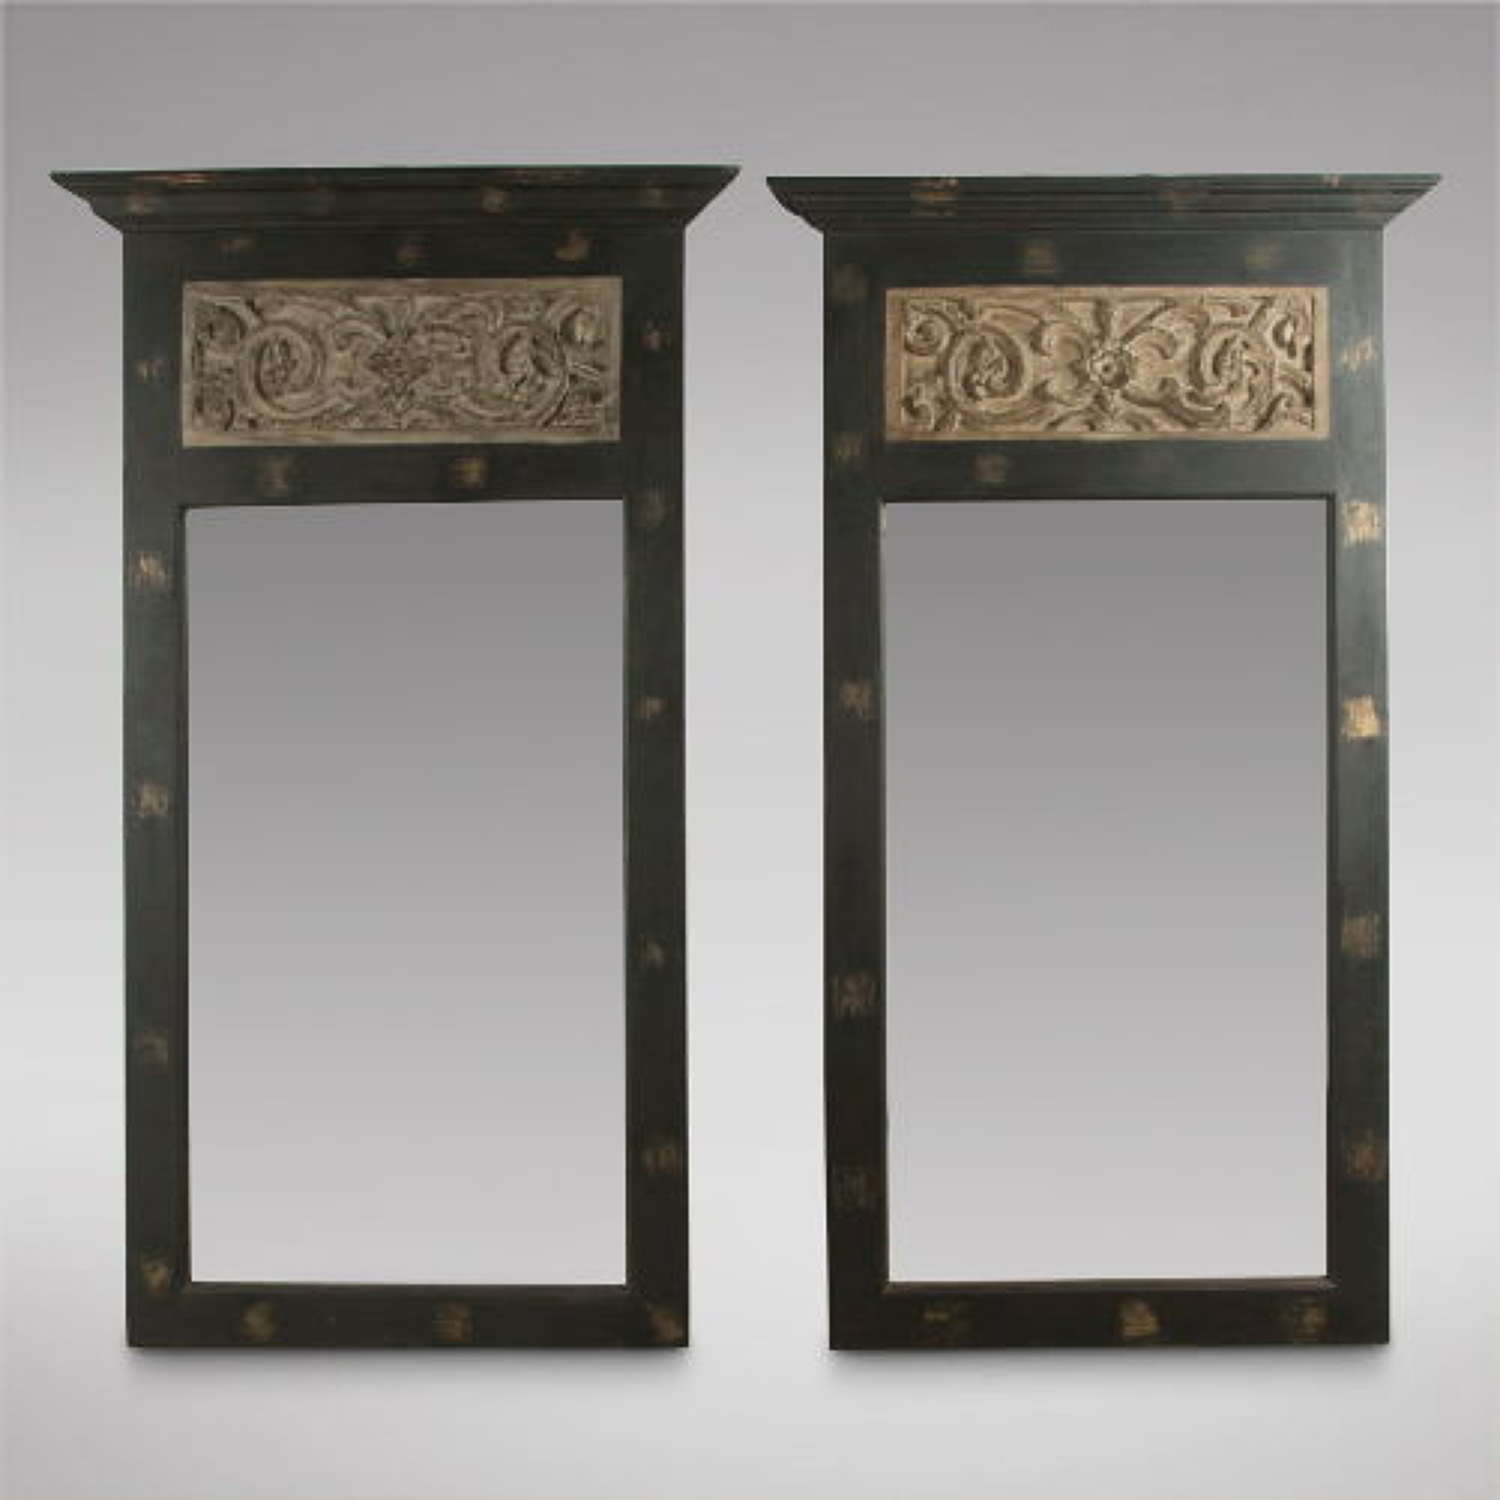 Pair of Highly Decorative Pier Mirrors